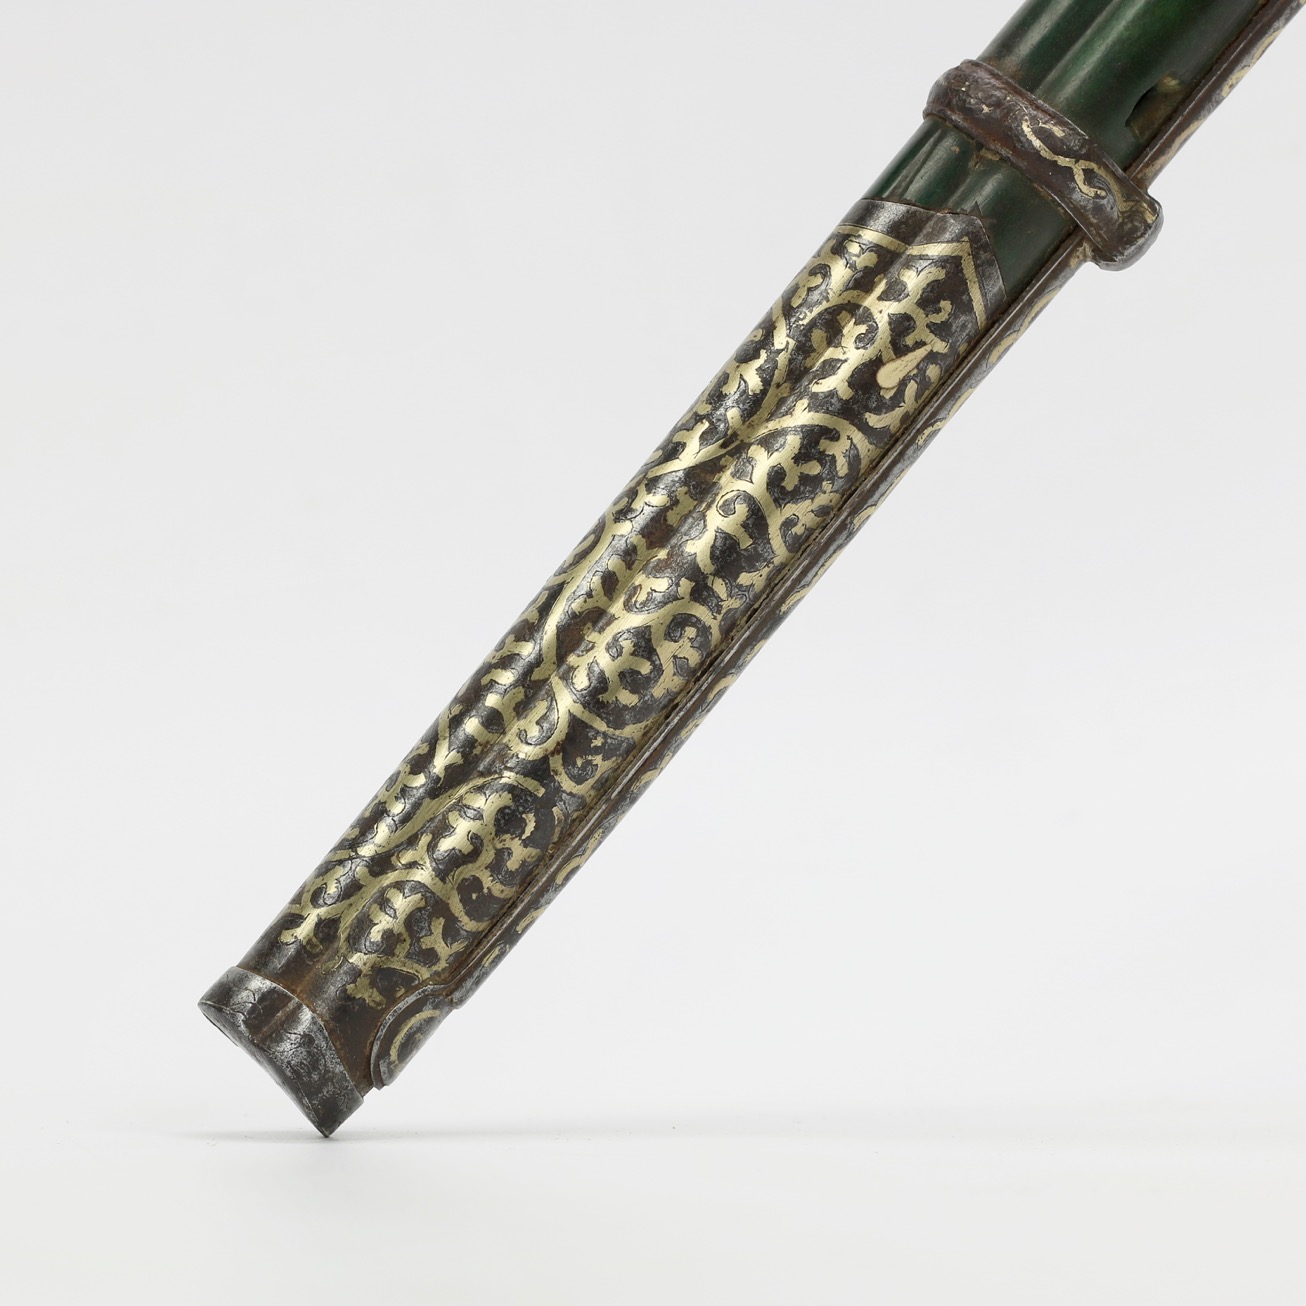 A large Chinese trousse knife with inlaid iron mounts